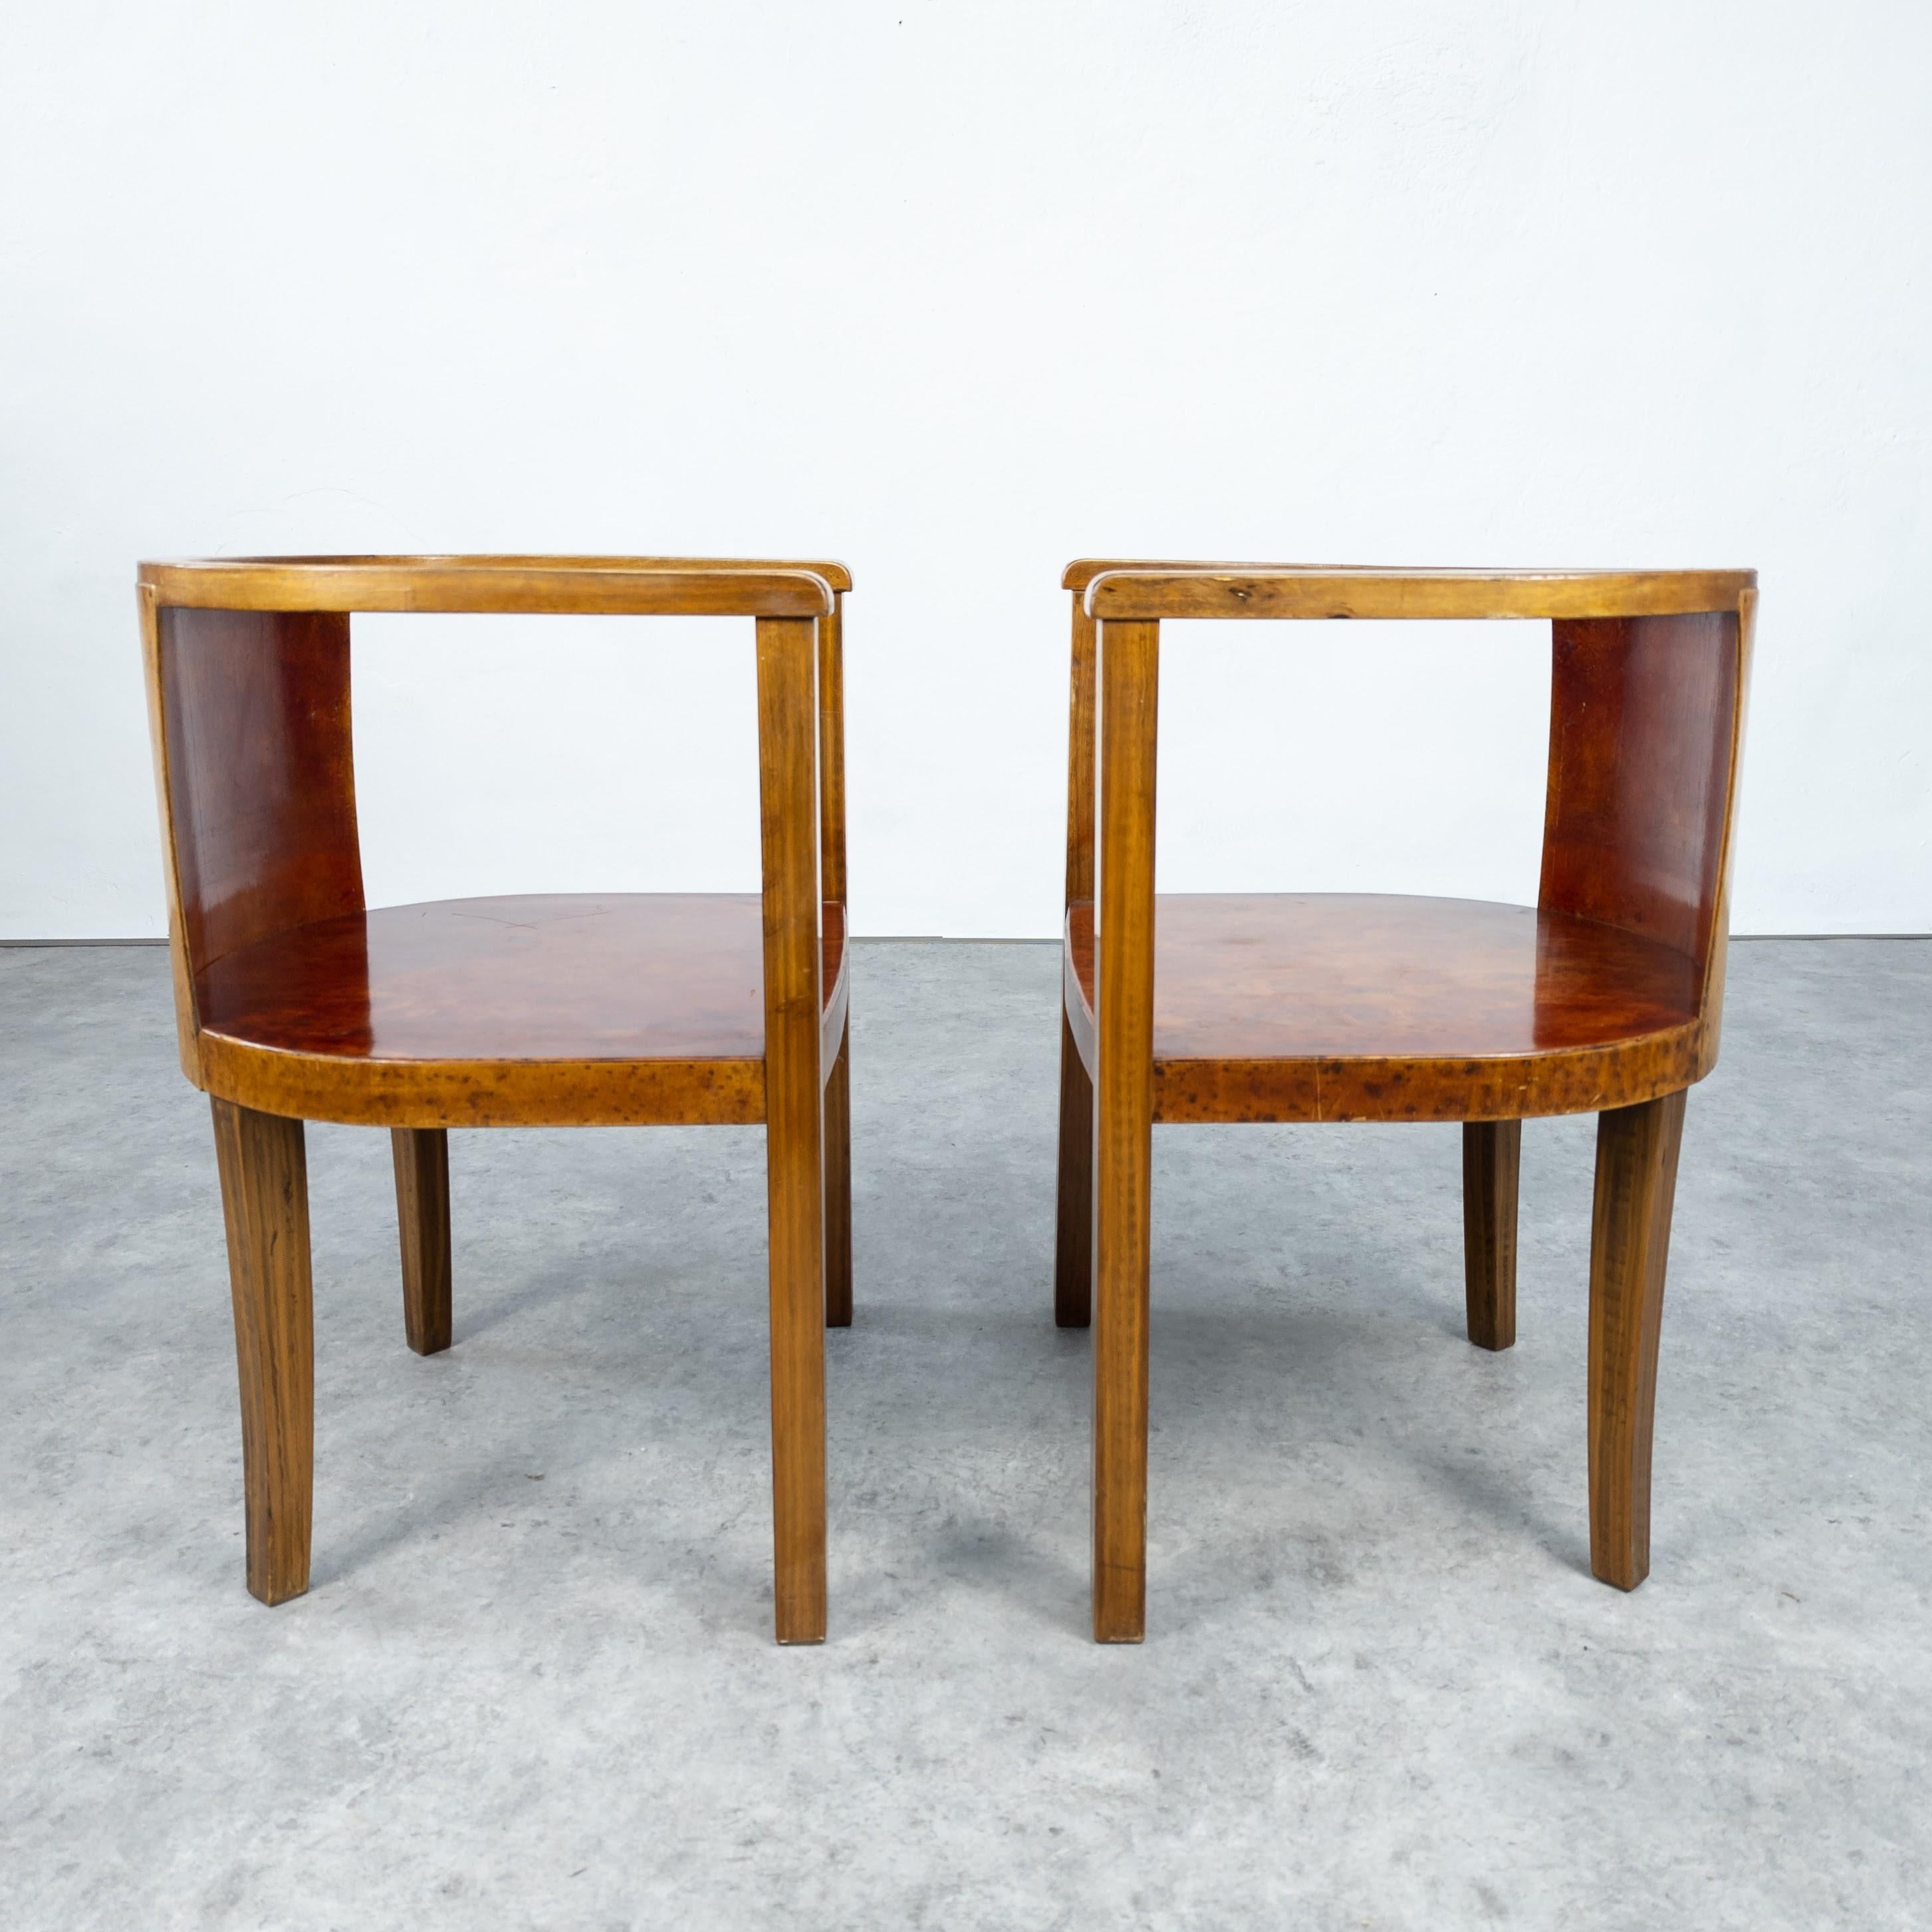 Pair of 1930's German Modernist Barrel Chairs In Good Condition For Sale In PRAHA 5, CZ